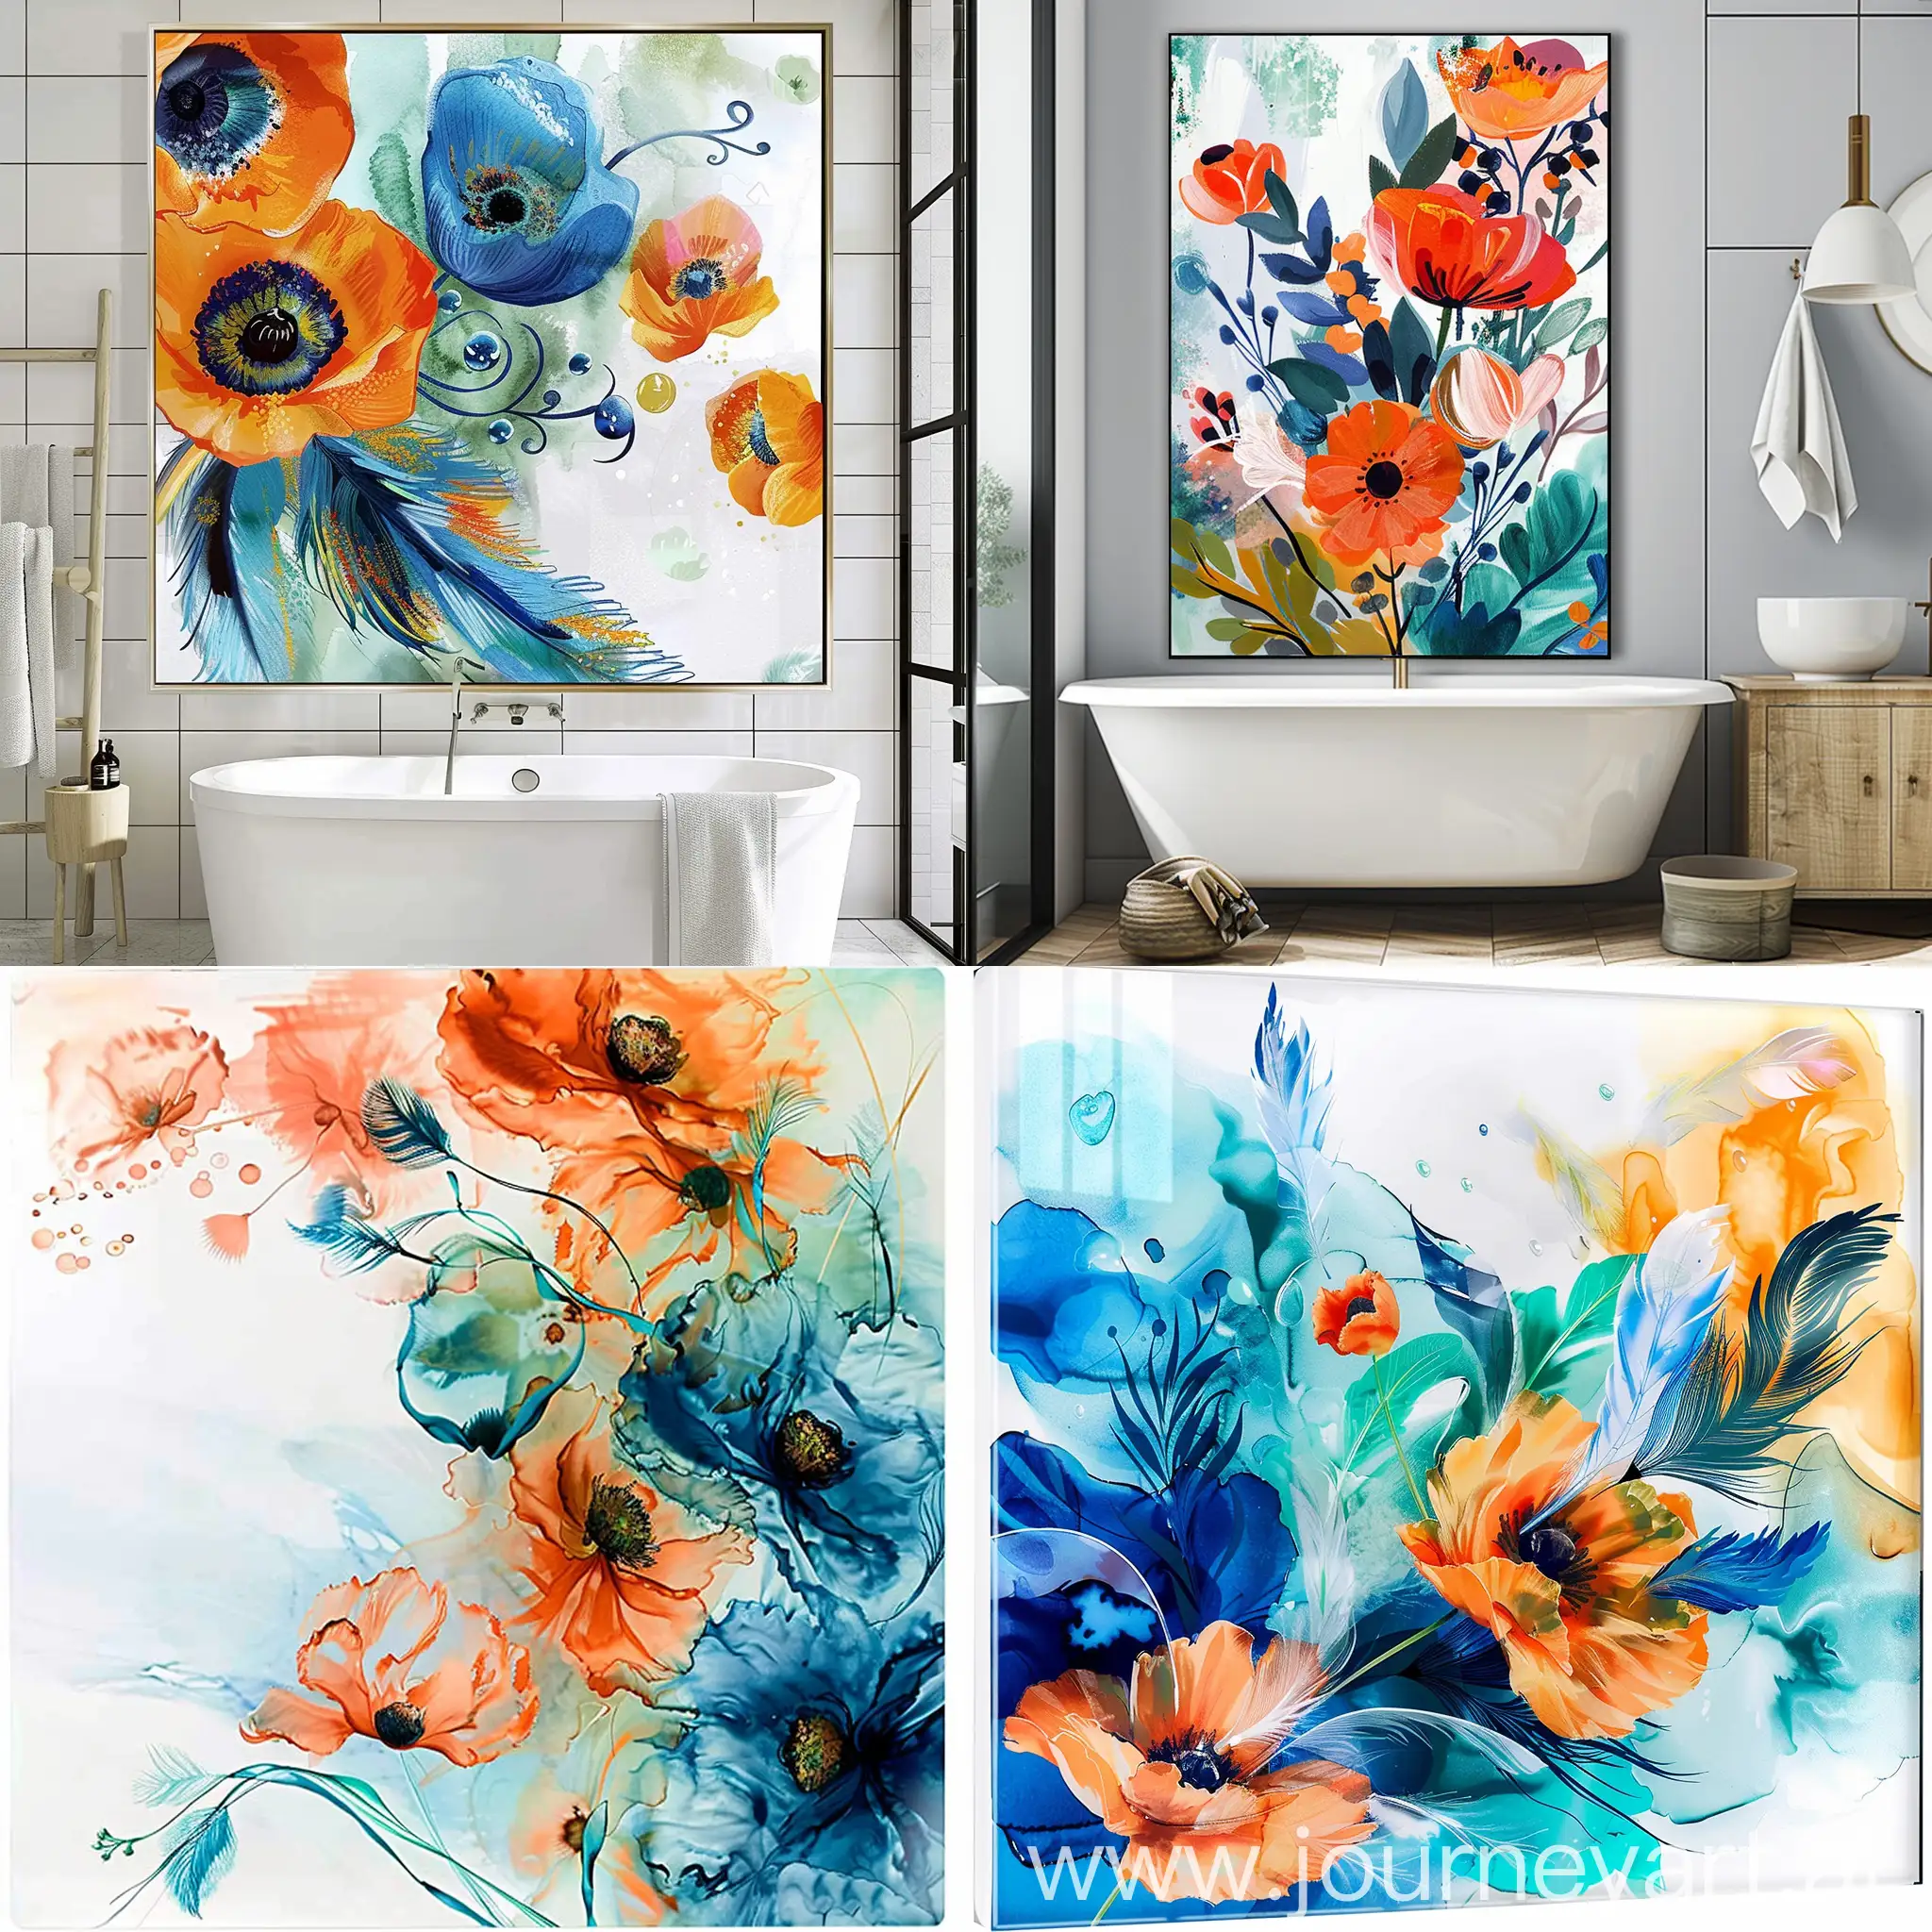 Boho-Floral-Abstract-Bathroom-Dcor-with-Poppies-Posies-and-Feathers